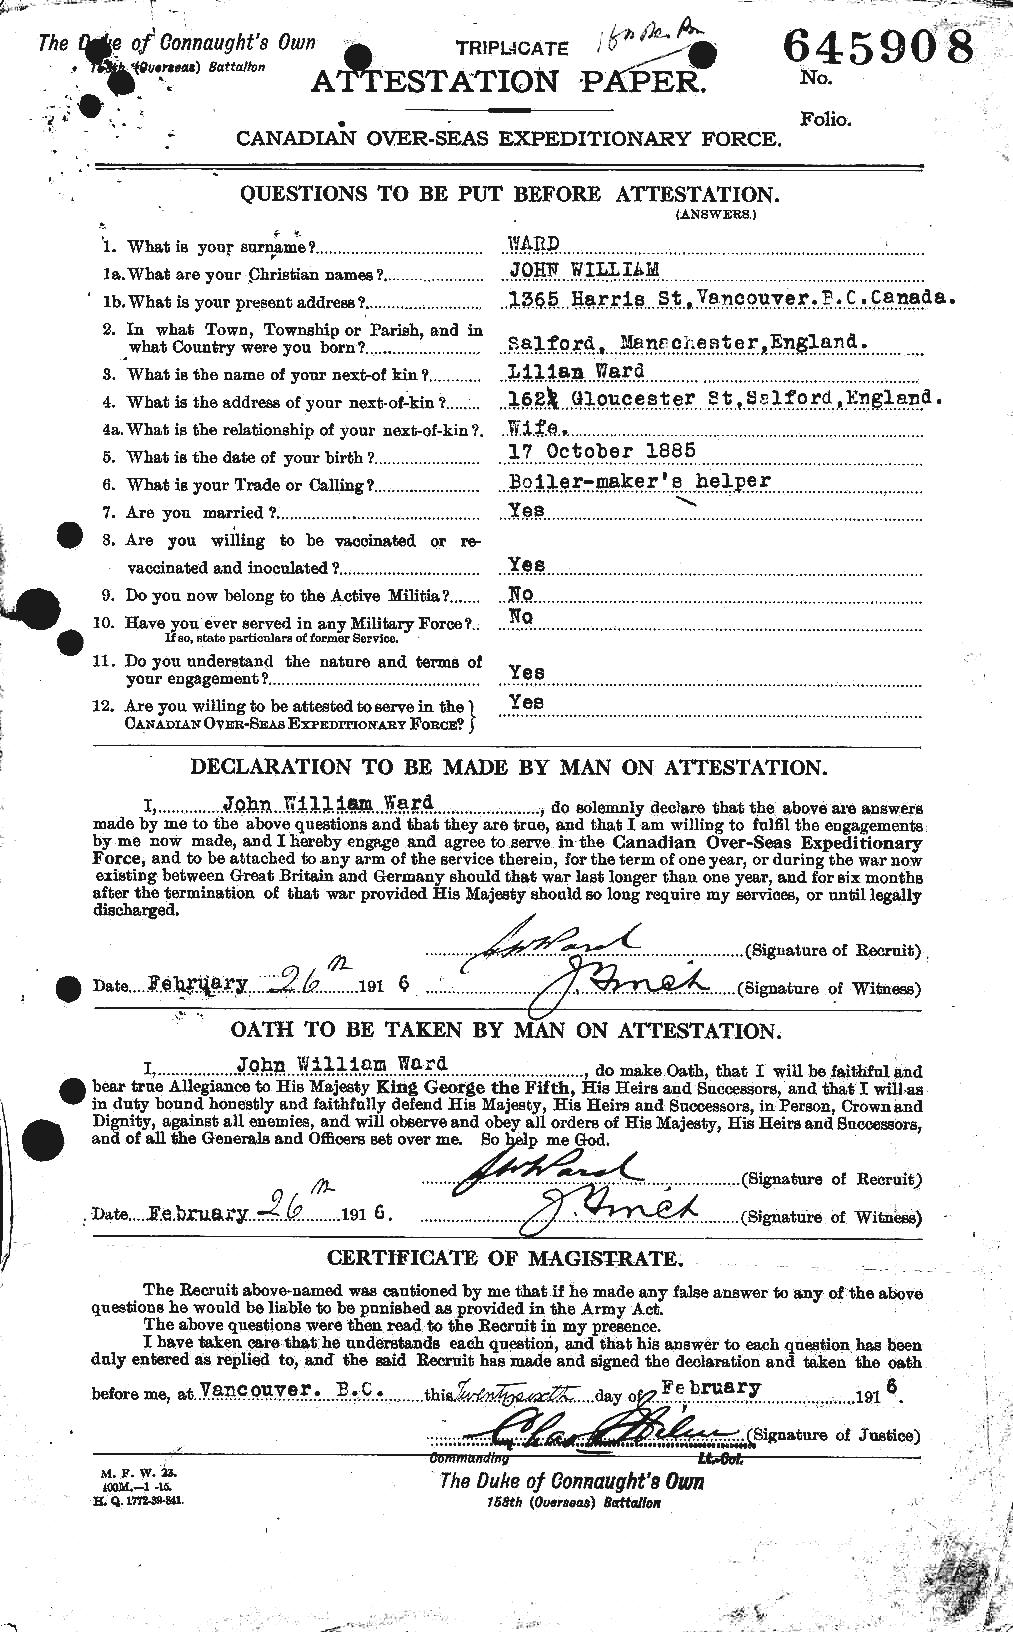 Personnel Records of the First World War - CEF 659547a